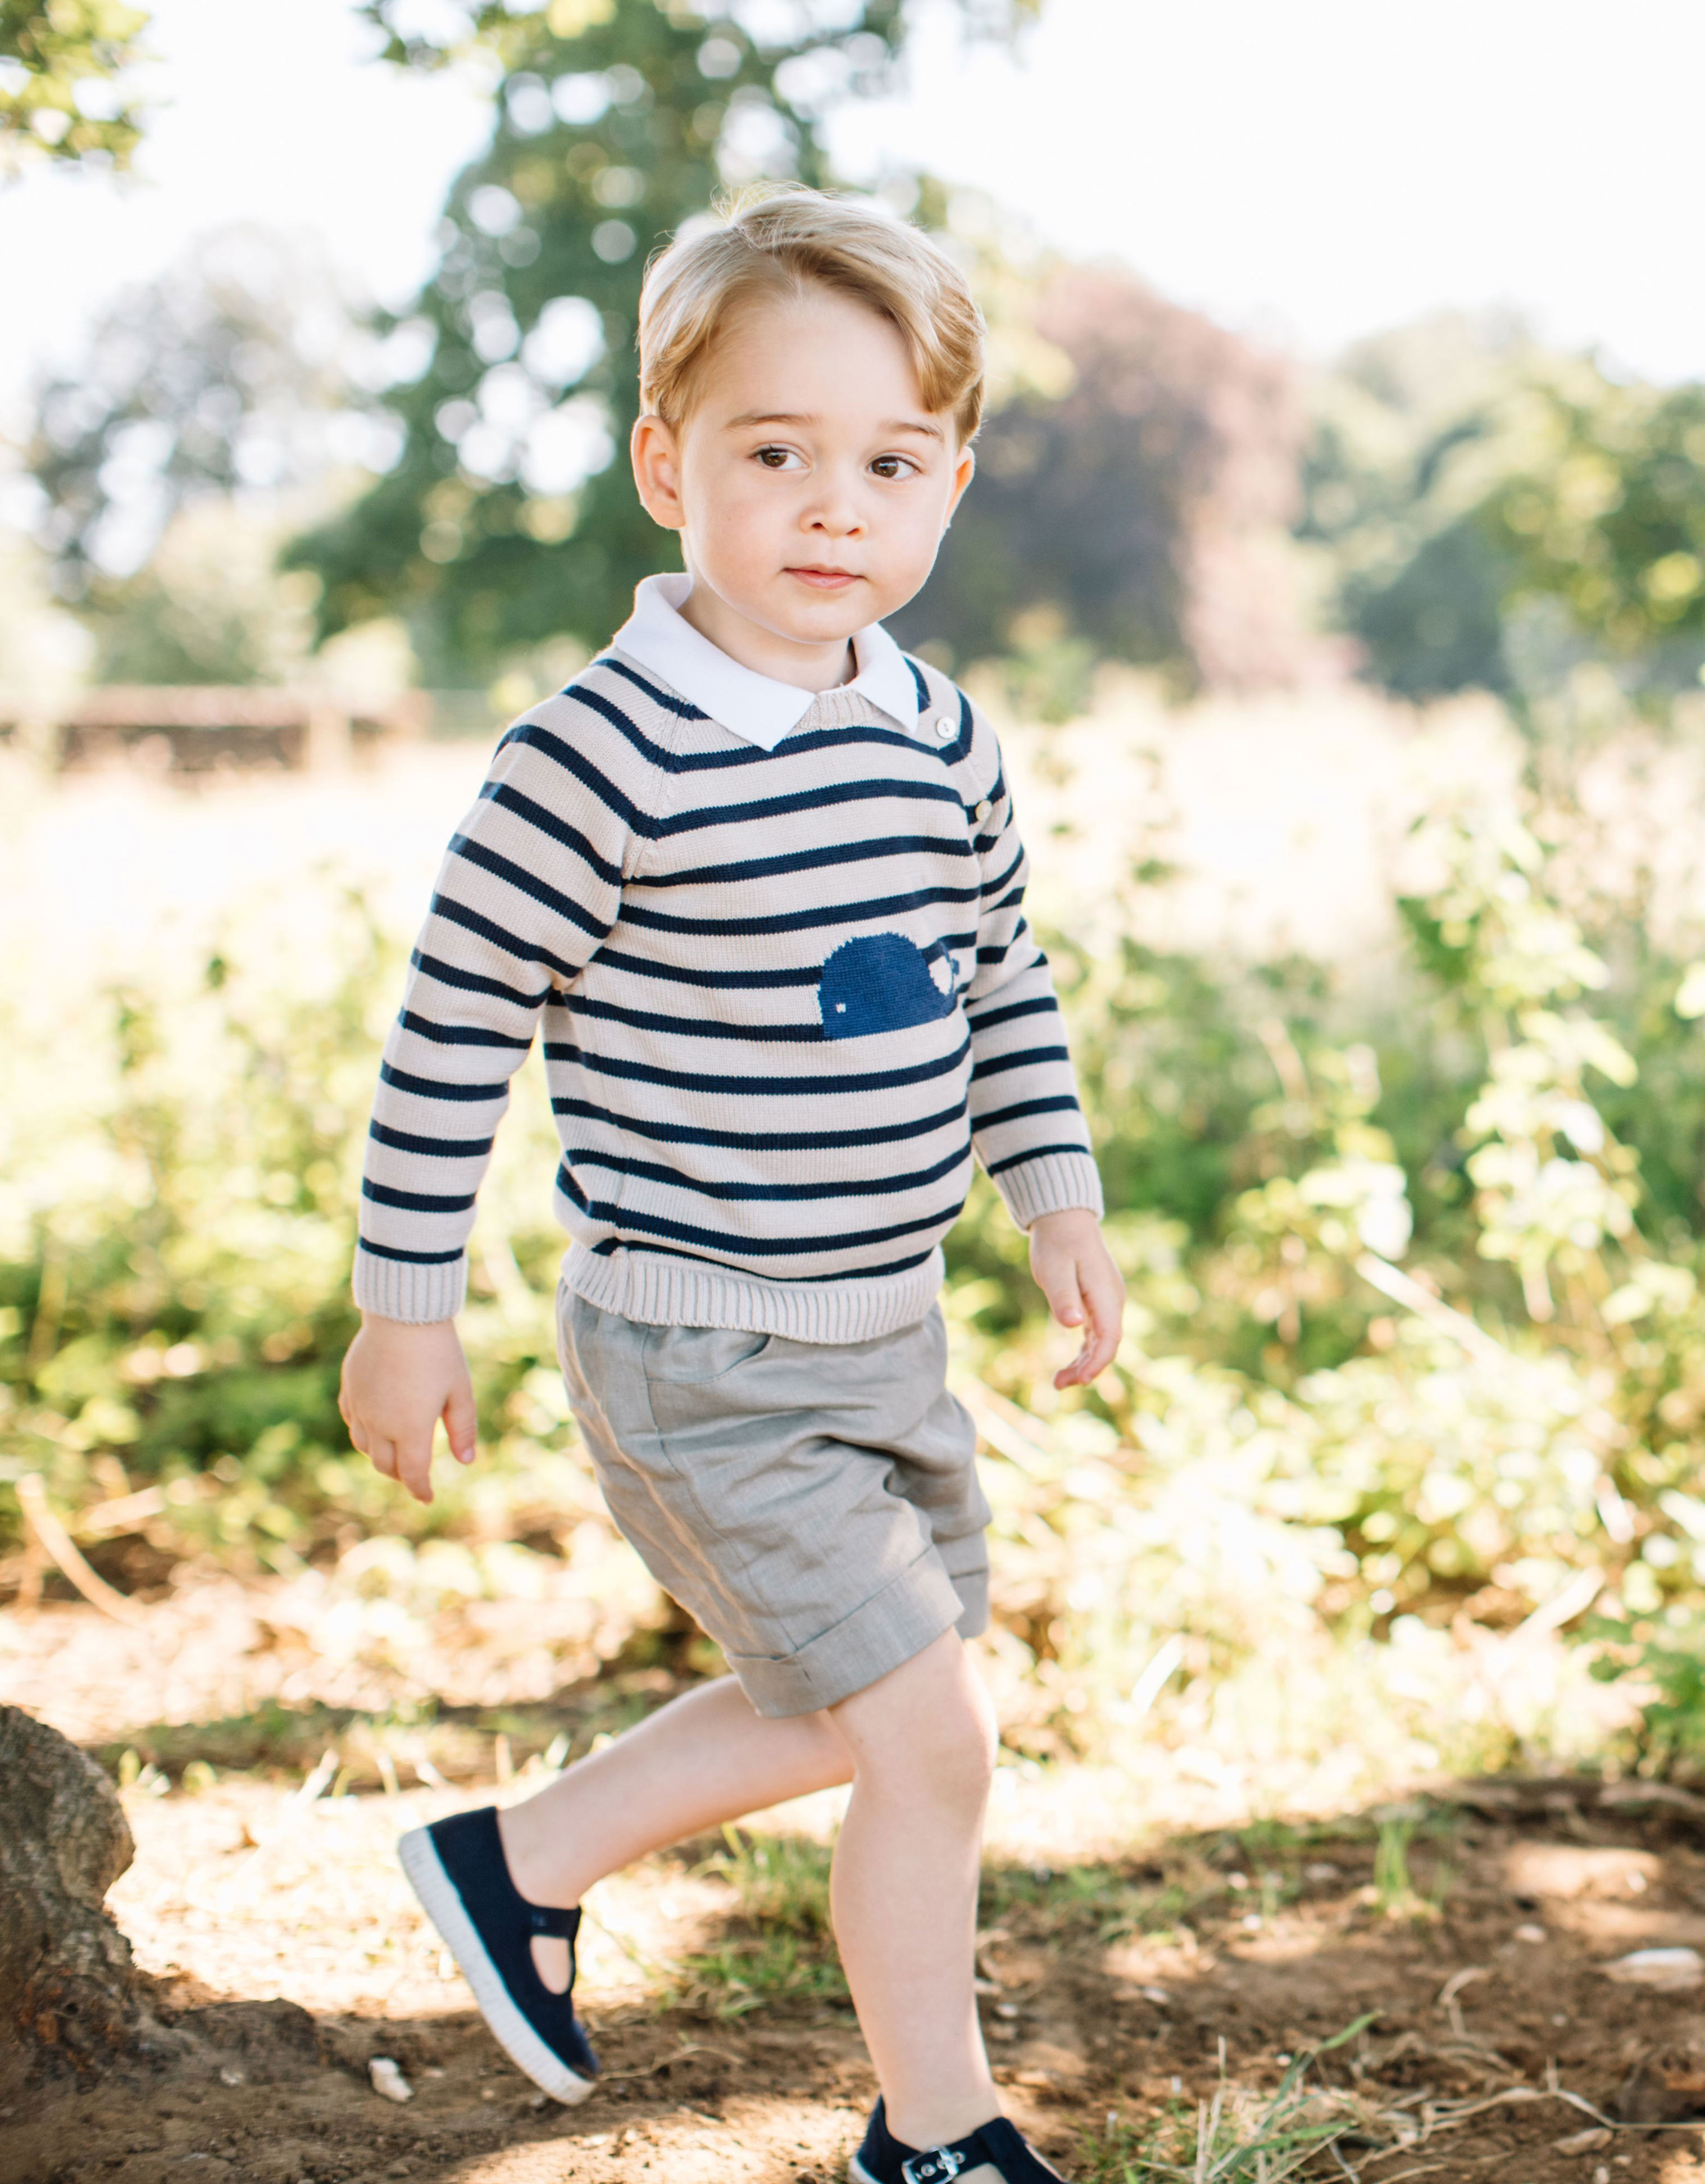 <p>Prince George posed for this photo on his parents' estate in Norfolk, England, in a photo released by <a href="https://www.wonderwall.com/celebrity/profiles/overview/prince-william-482.article">Prince William</a> and <a href="https://www.wonderwall.com/celebrity/profiles/overview/duchess-kate-1356.article">Duchess Kate</a> on July 22, 2016, to celebrate his 3rd birthday.</p>